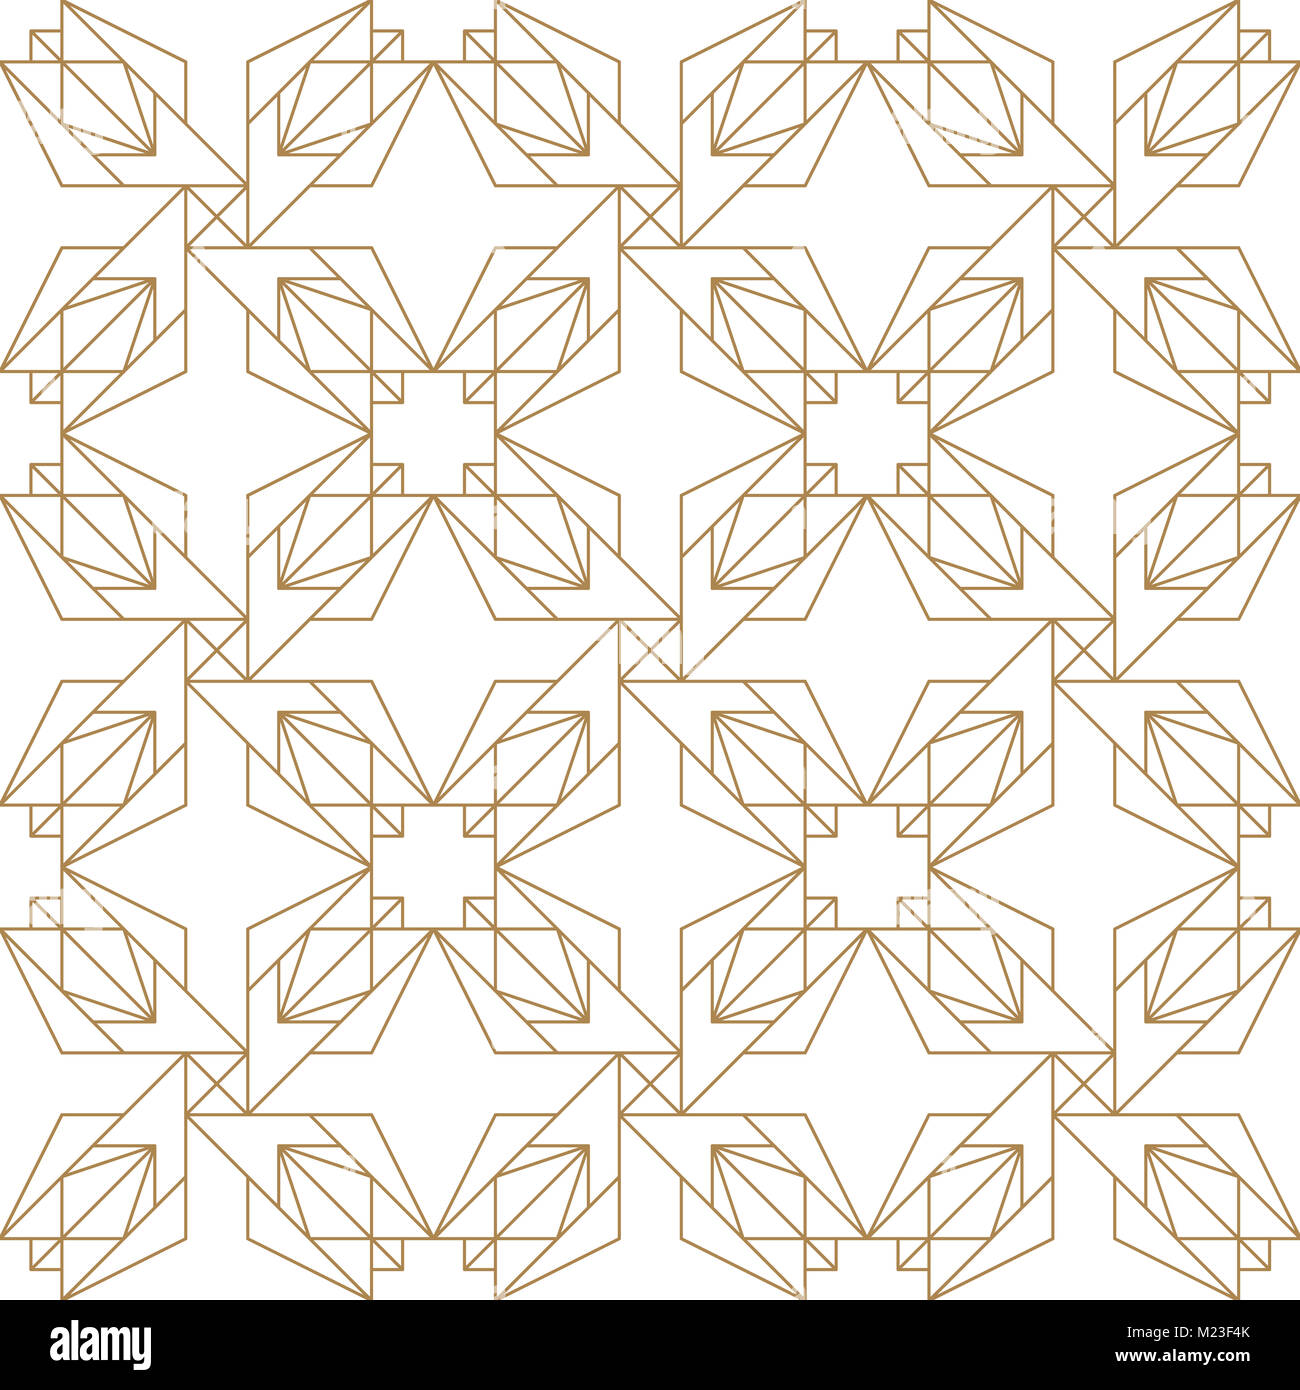 Gold geometric simple minimalist pattern.Oriental gold line background for wallpaper, texture, backdrop, template, cover page design, card, poster. Stock Photo